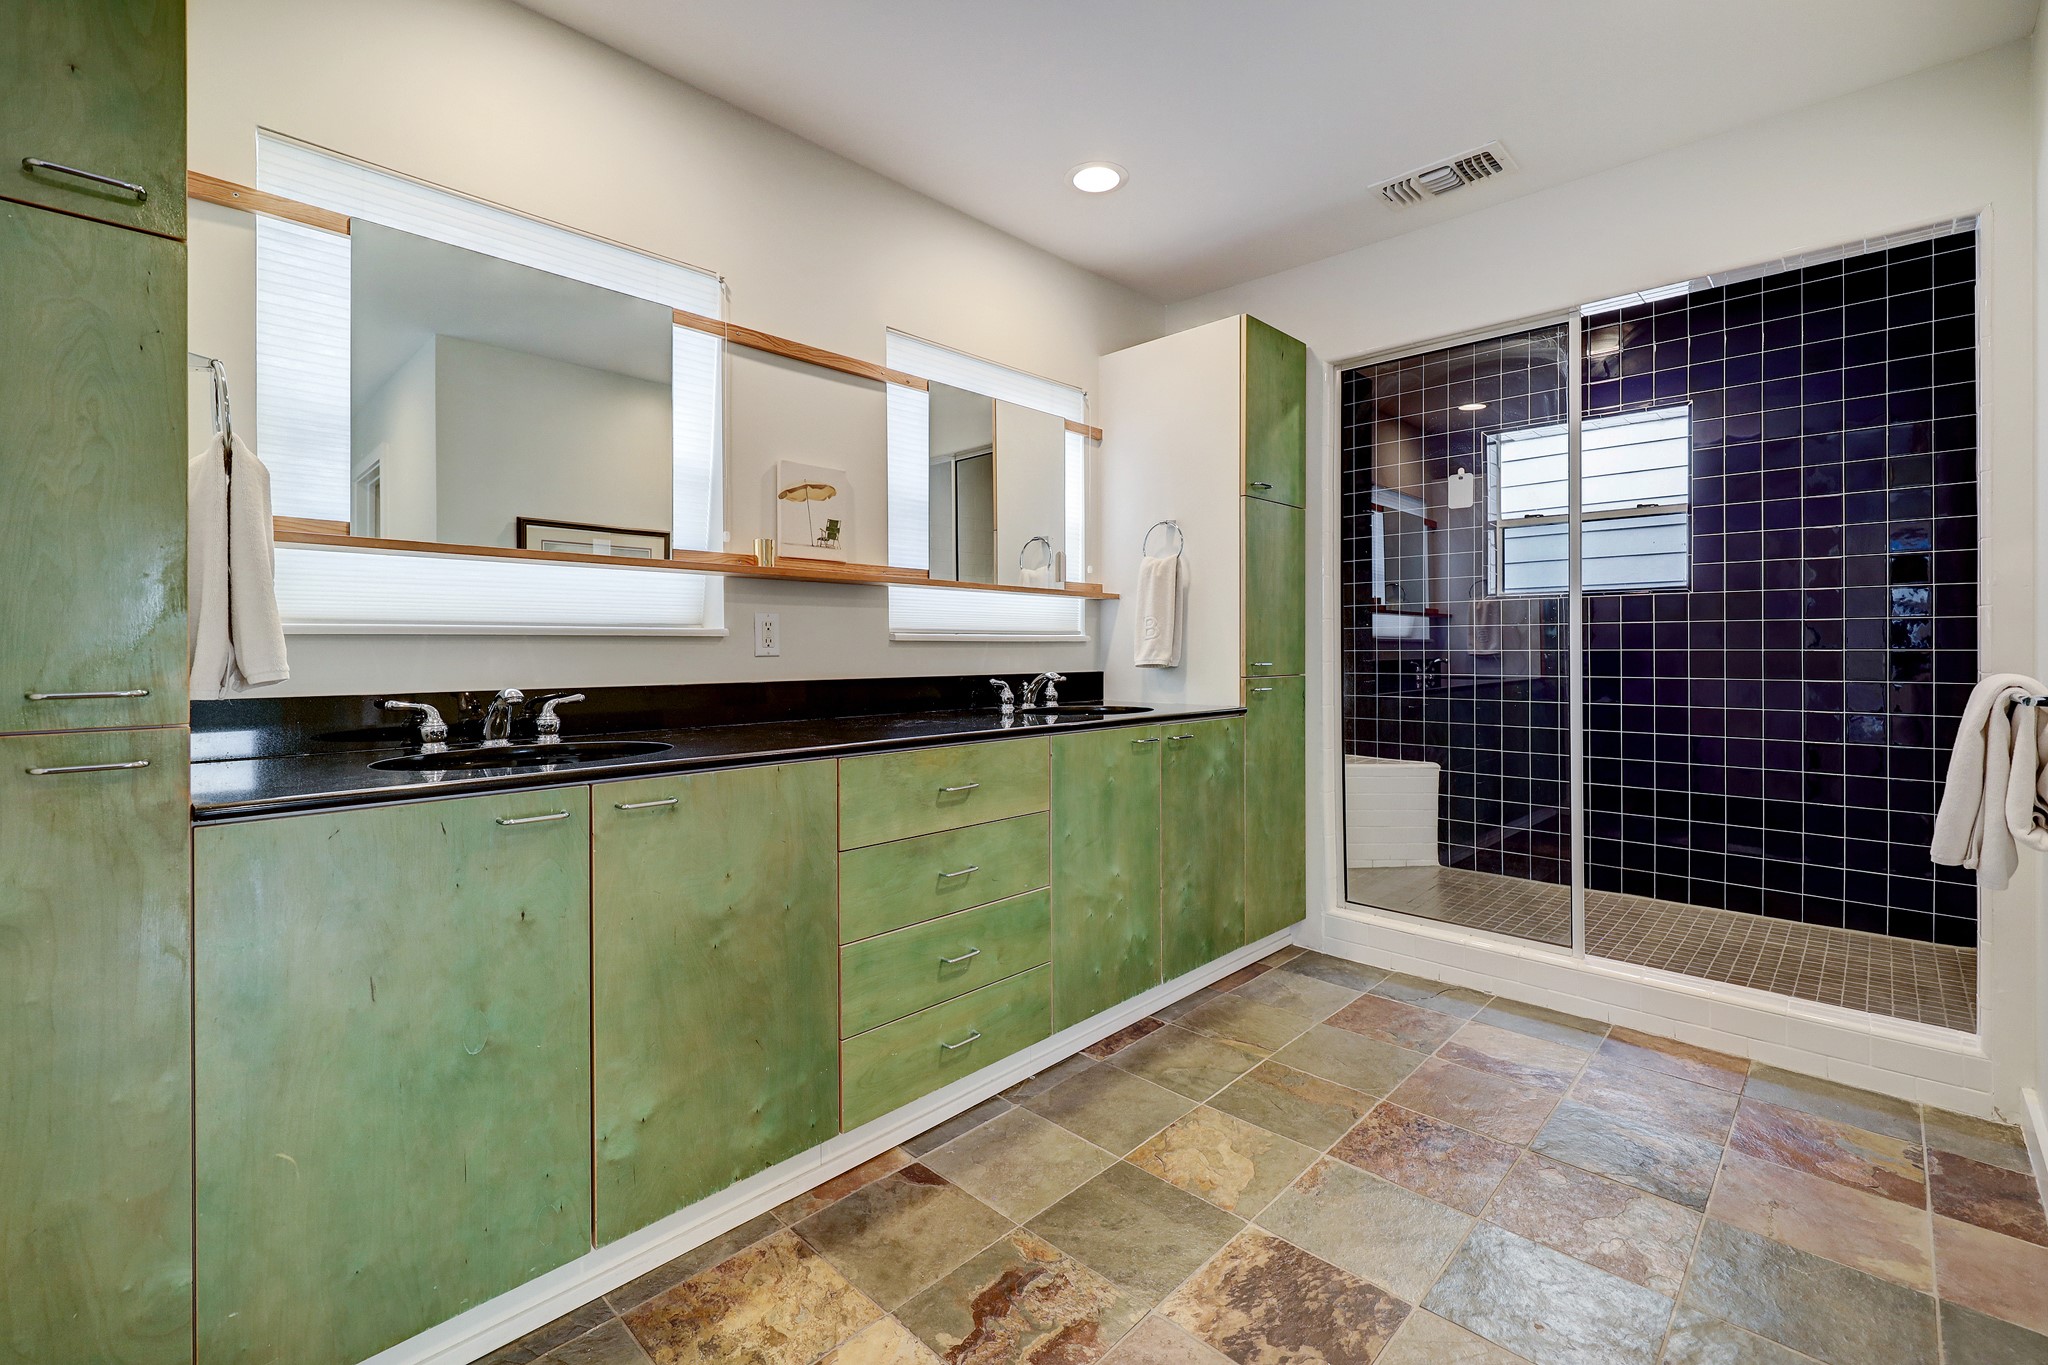 Double sinks, amazing storage, and an oversized shower make this primary bathroom both functional and eye-catching.